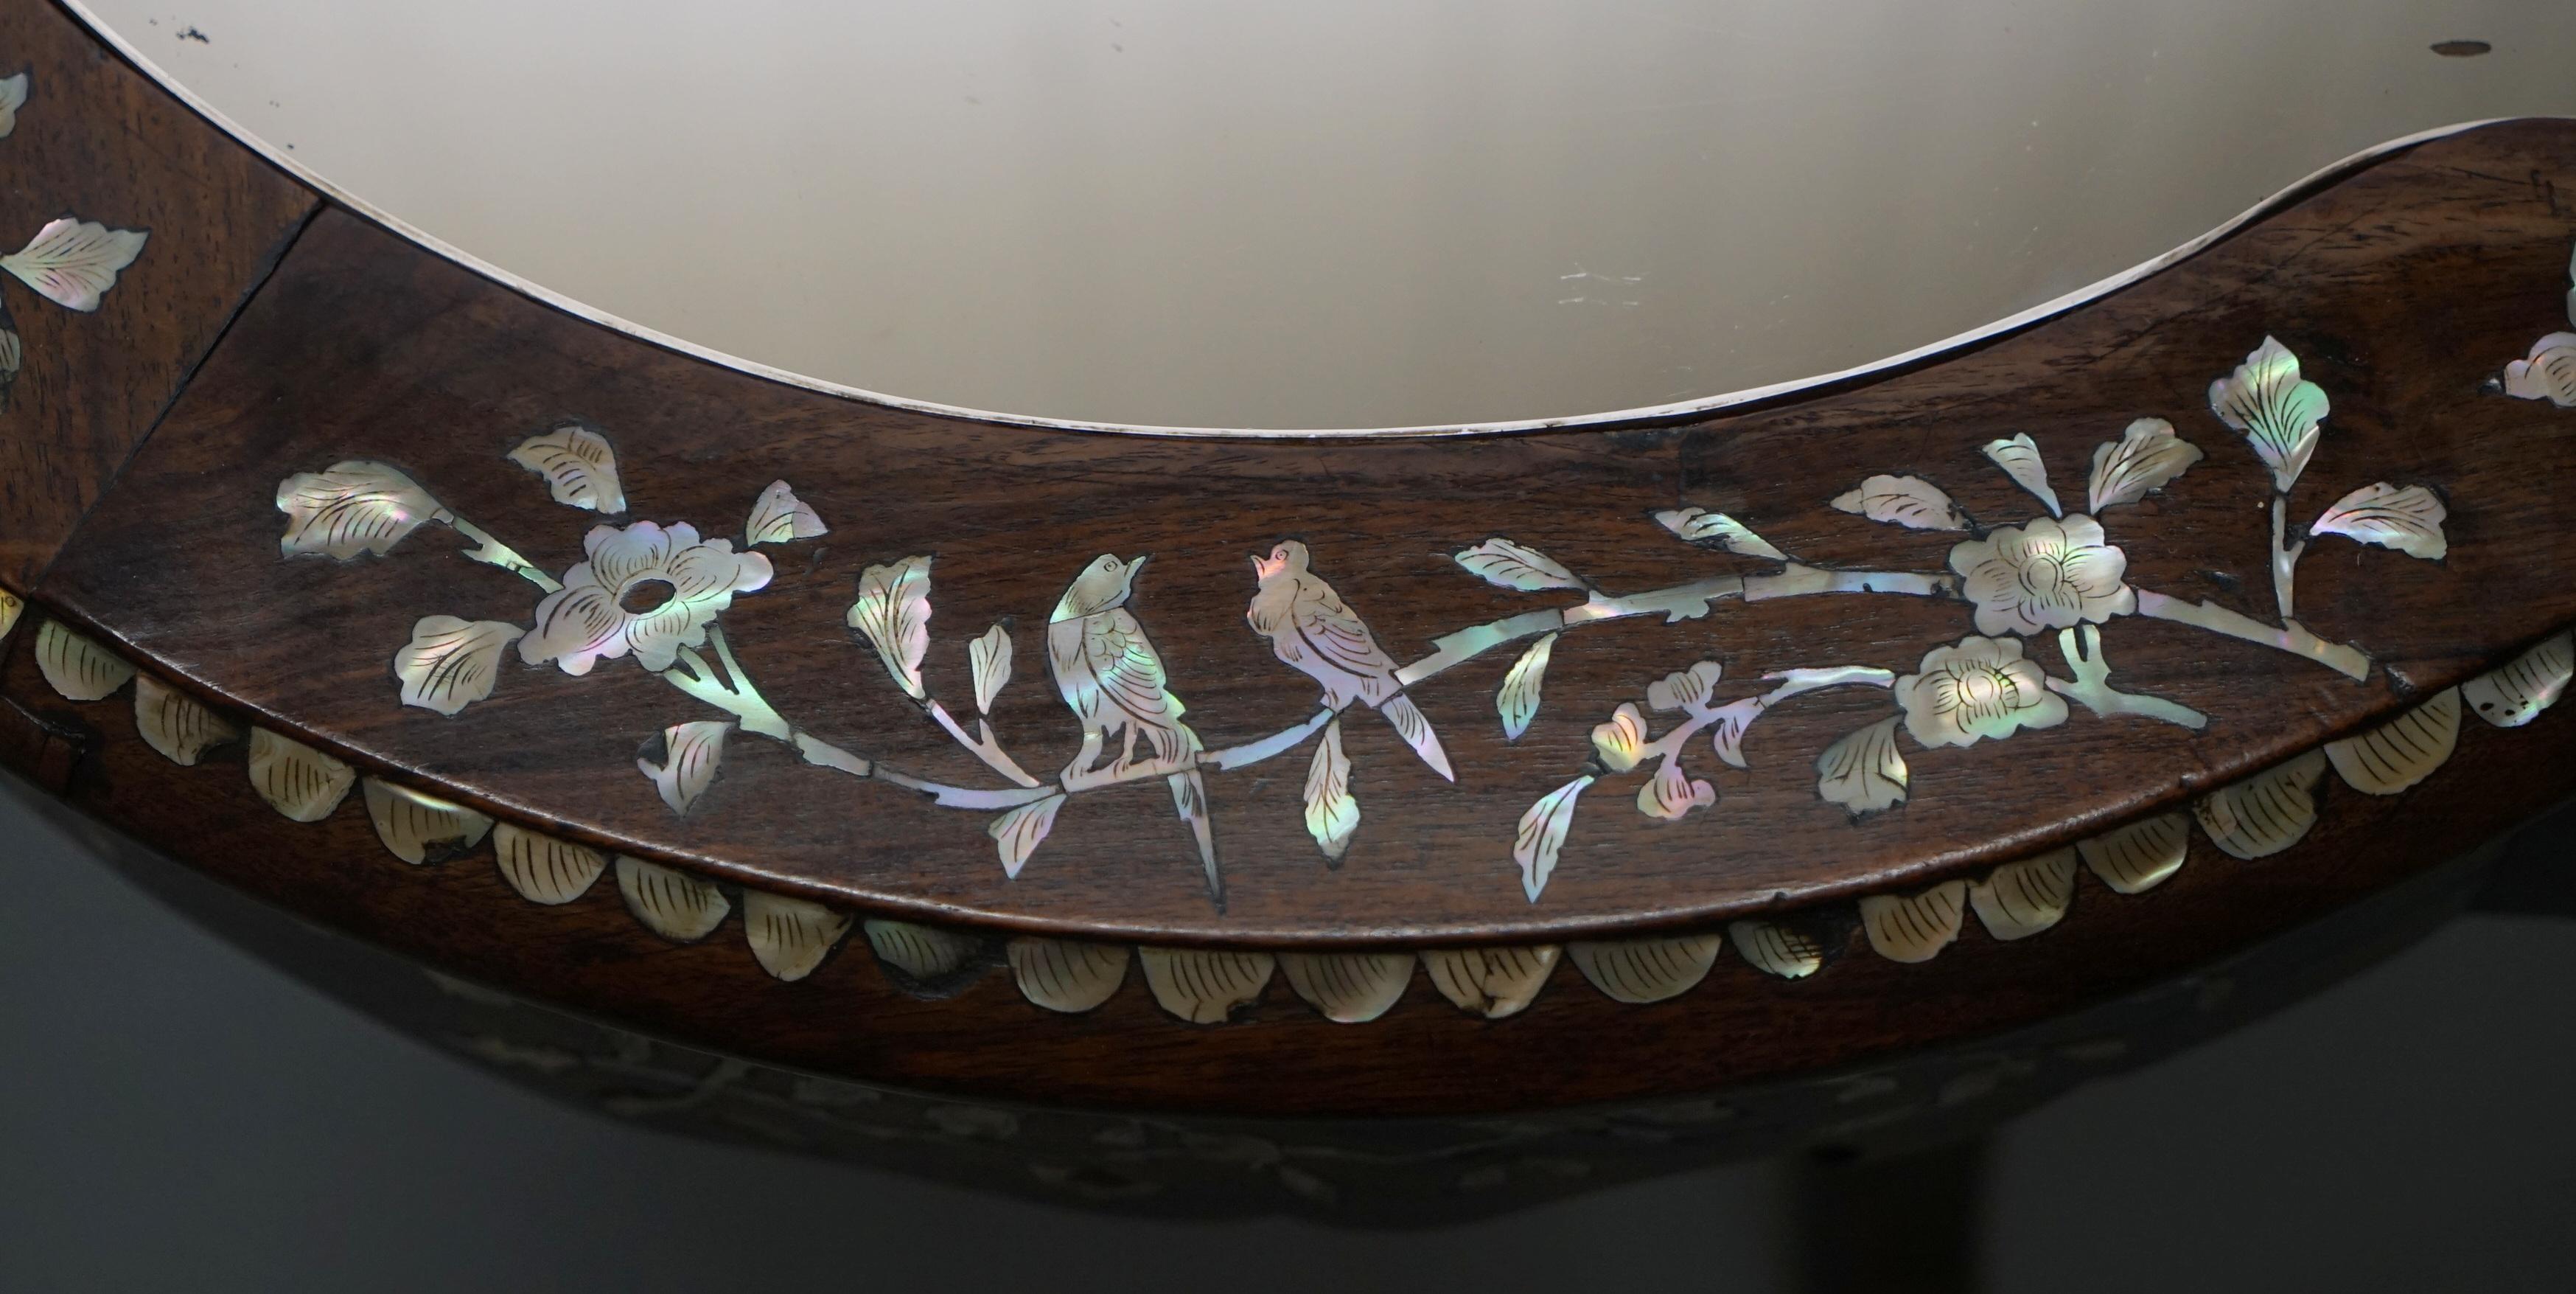 Hand-Crafted 1924 British Empire Chinese Exhibition Rosewood & Mother of Pearl Inlaid Table